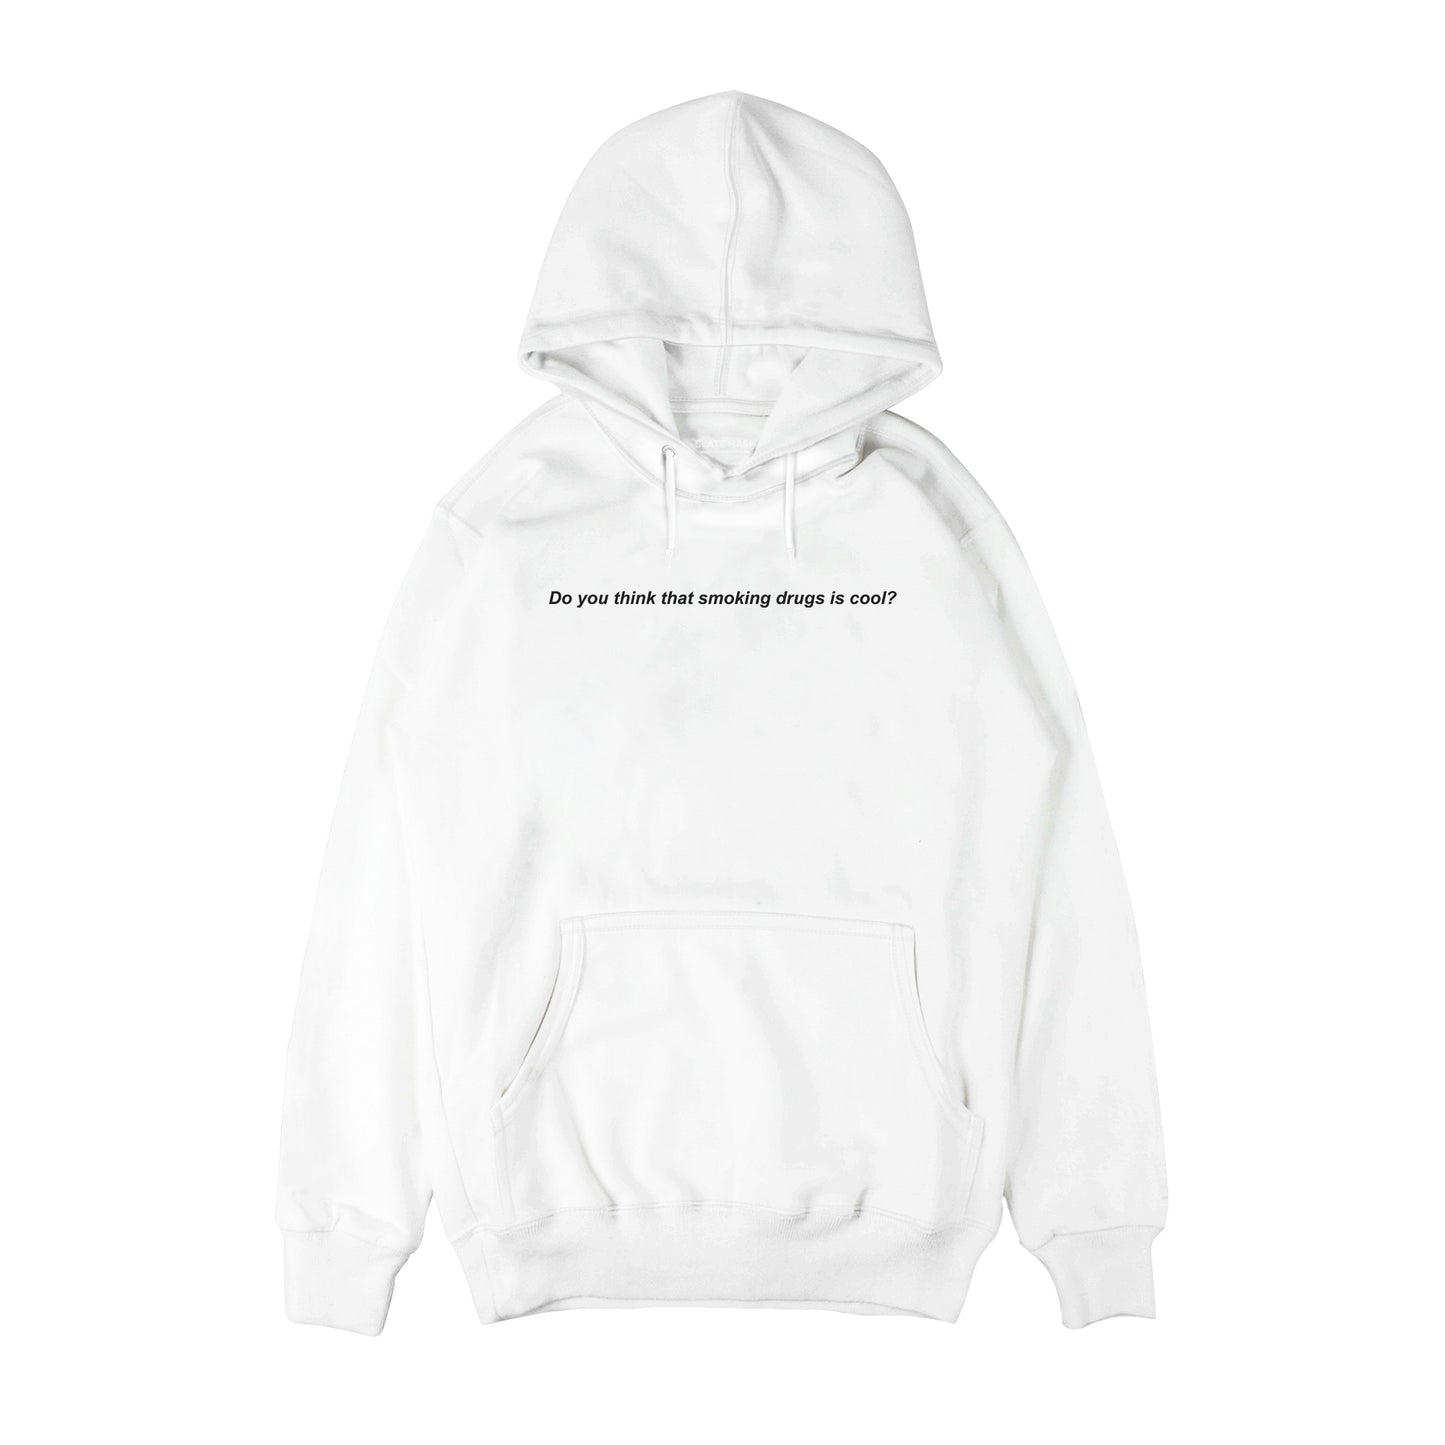 Do you think that smoking drugs is cool? Hoodie